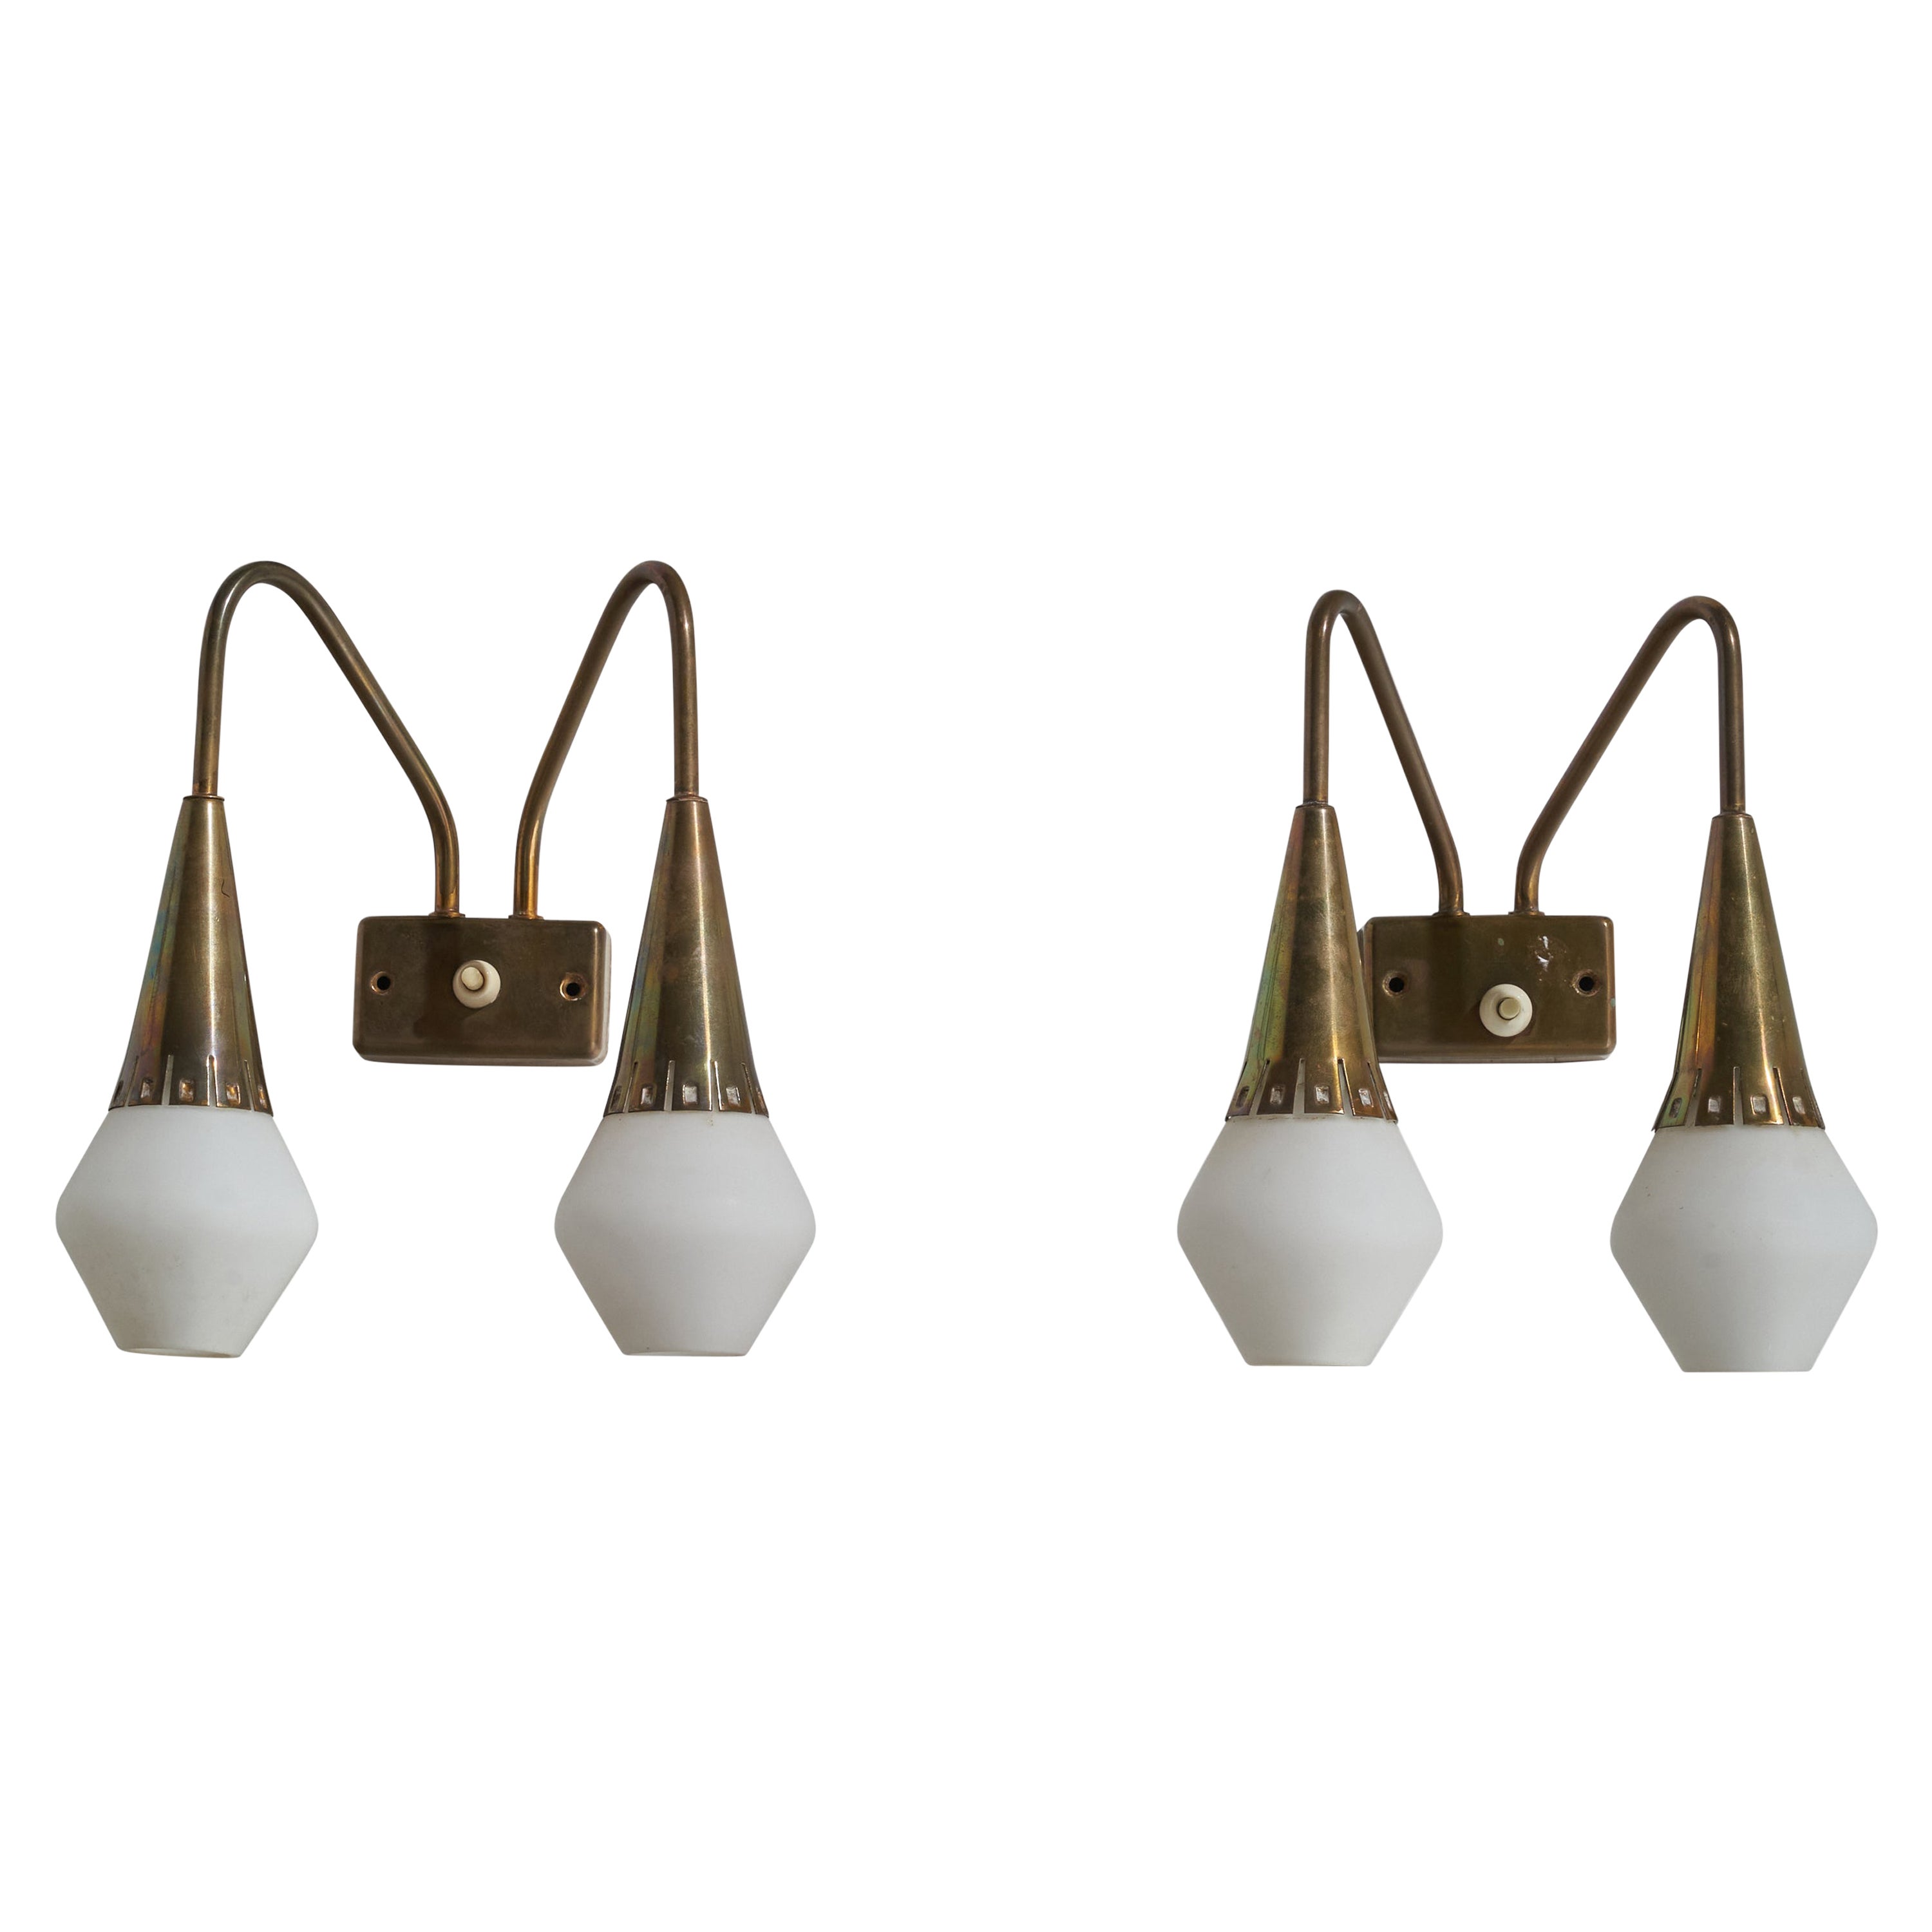 Harald Notini, Wall Lights, Brass, Glass, Sweden, 1940s For Sale